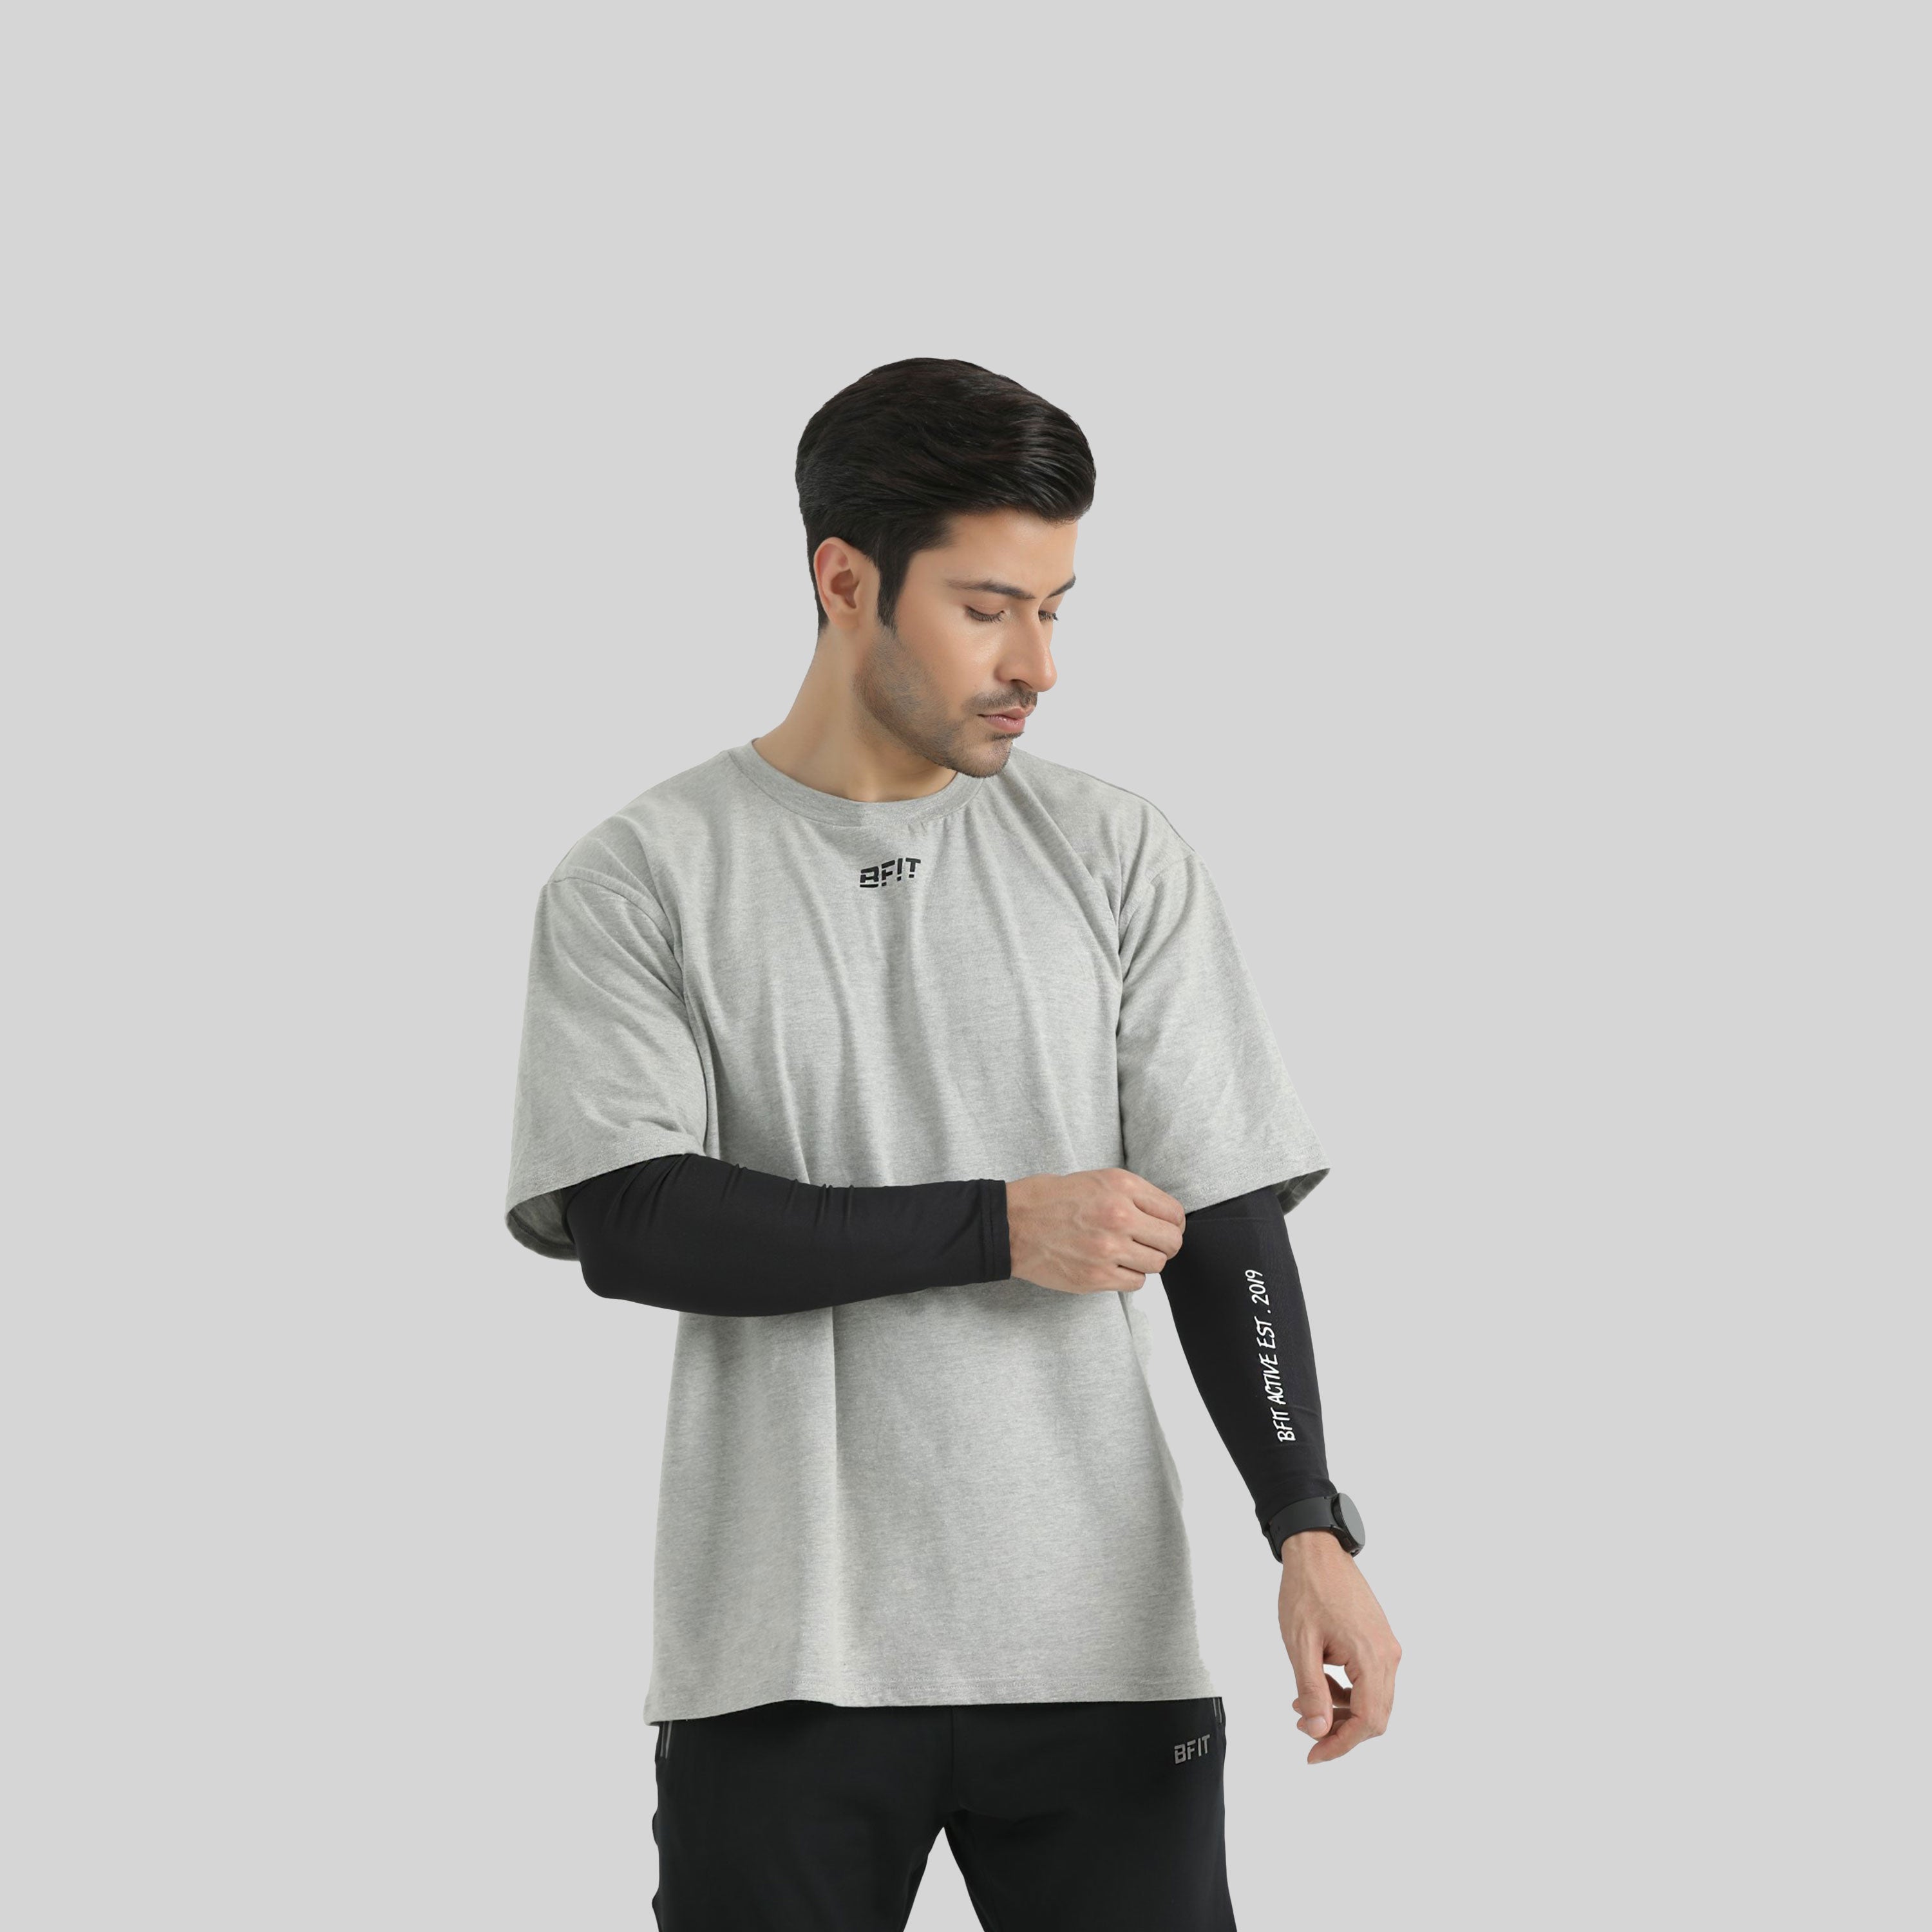 Oversized Shirts Absorbed Compression Sleeves Grey